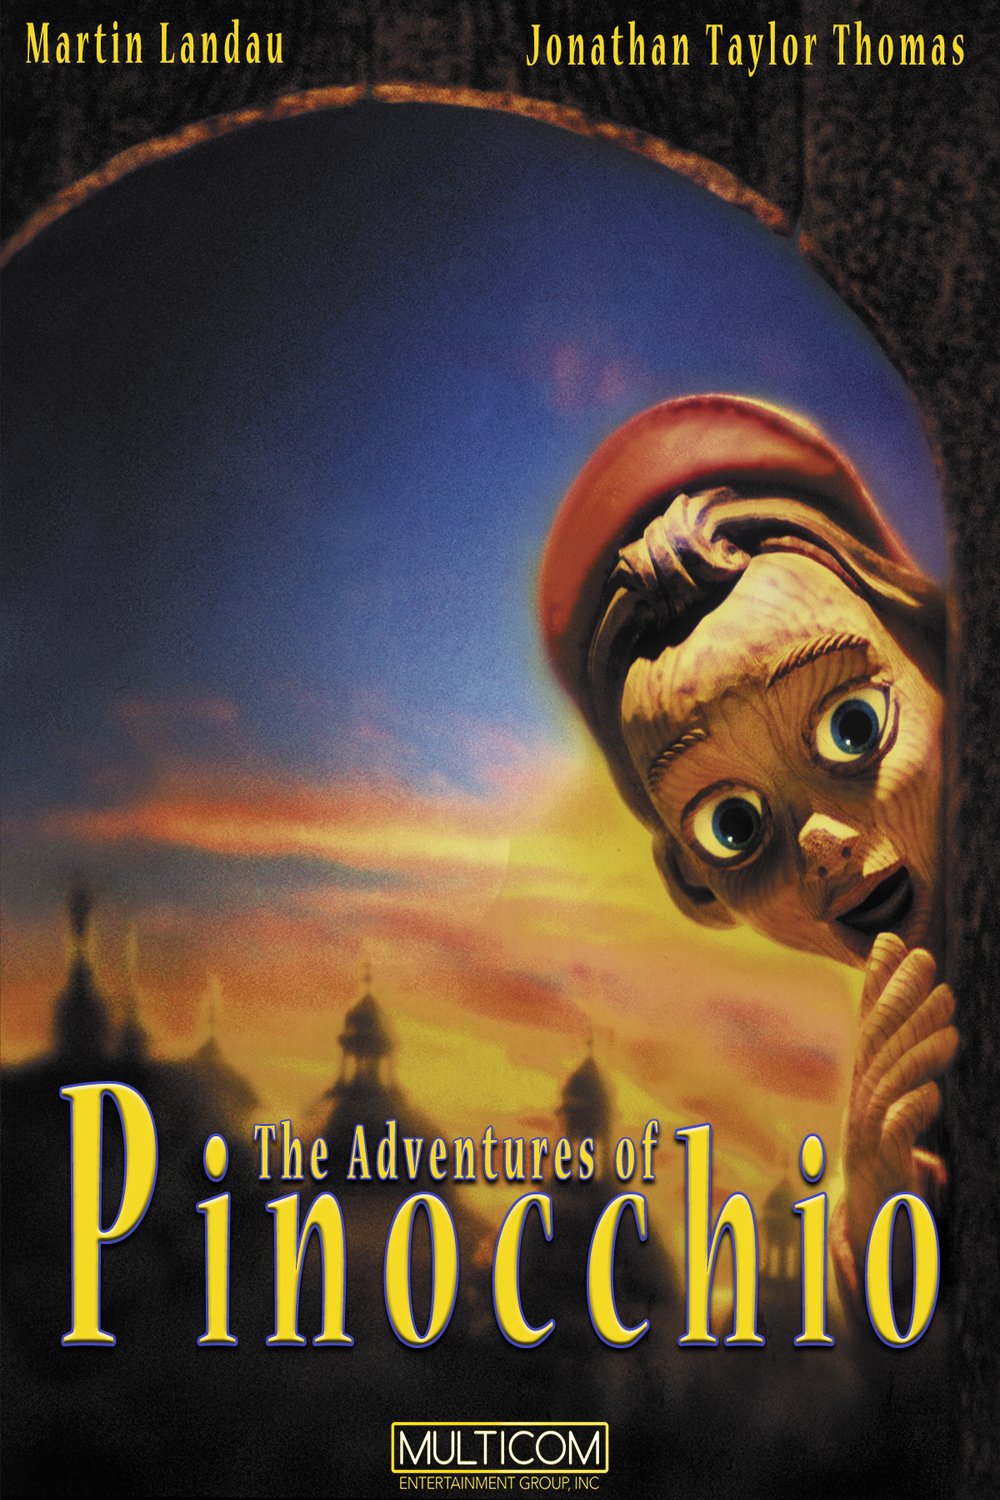 Poster of the movie The Adventures of Pinocchio